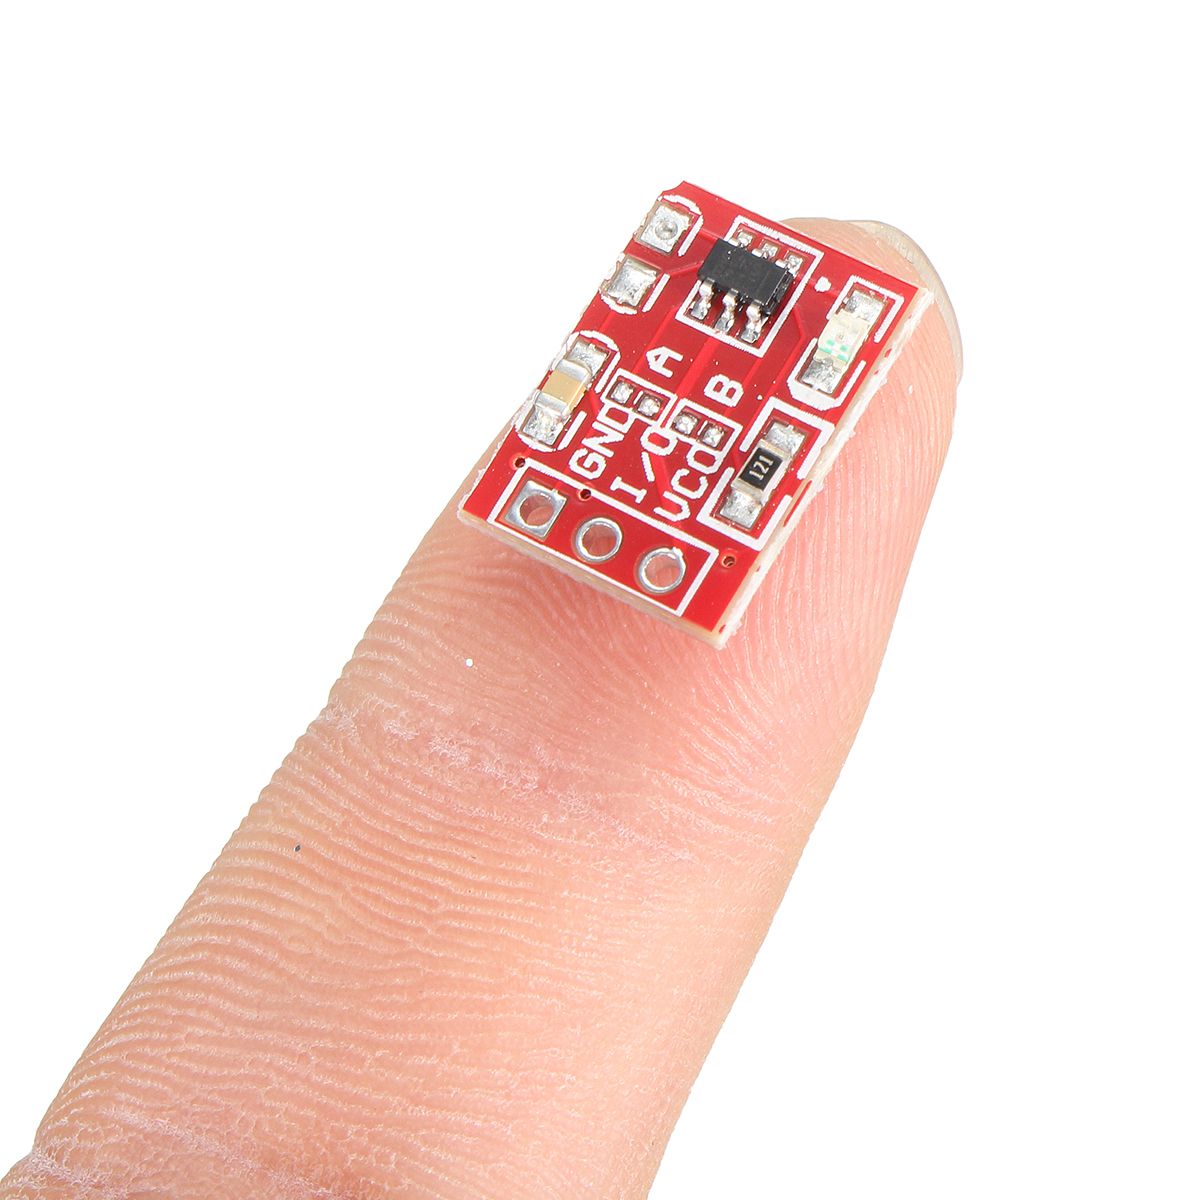 25-55V-TTP223-Capacitive-Touch-Switch-Button-Self-Lock-Module-1132664